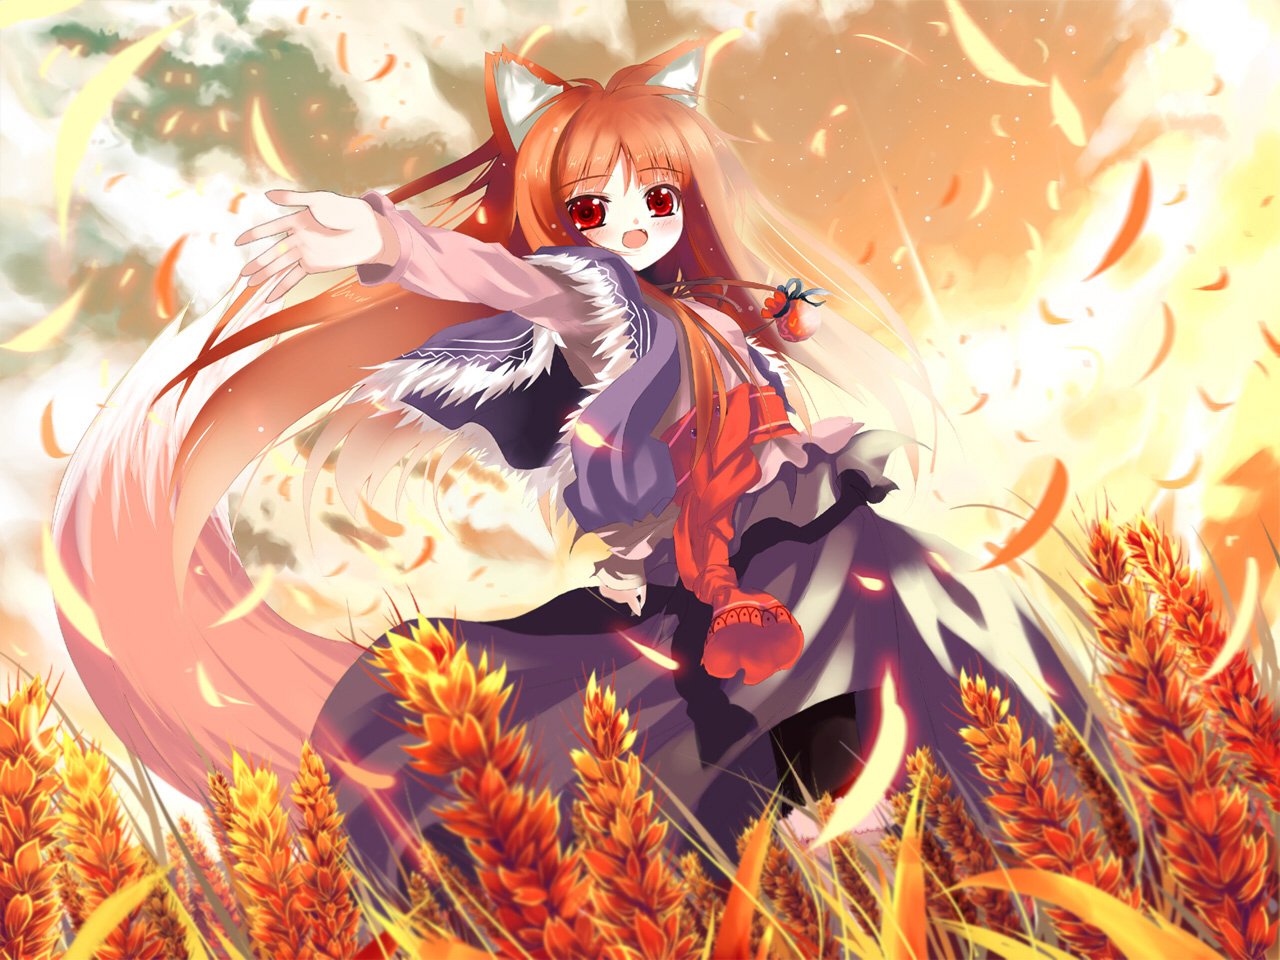 Cute Anime Wolf Wallpapers | Anime wolf, Wolf wallpaper, Anime-demhanvico.com.vn